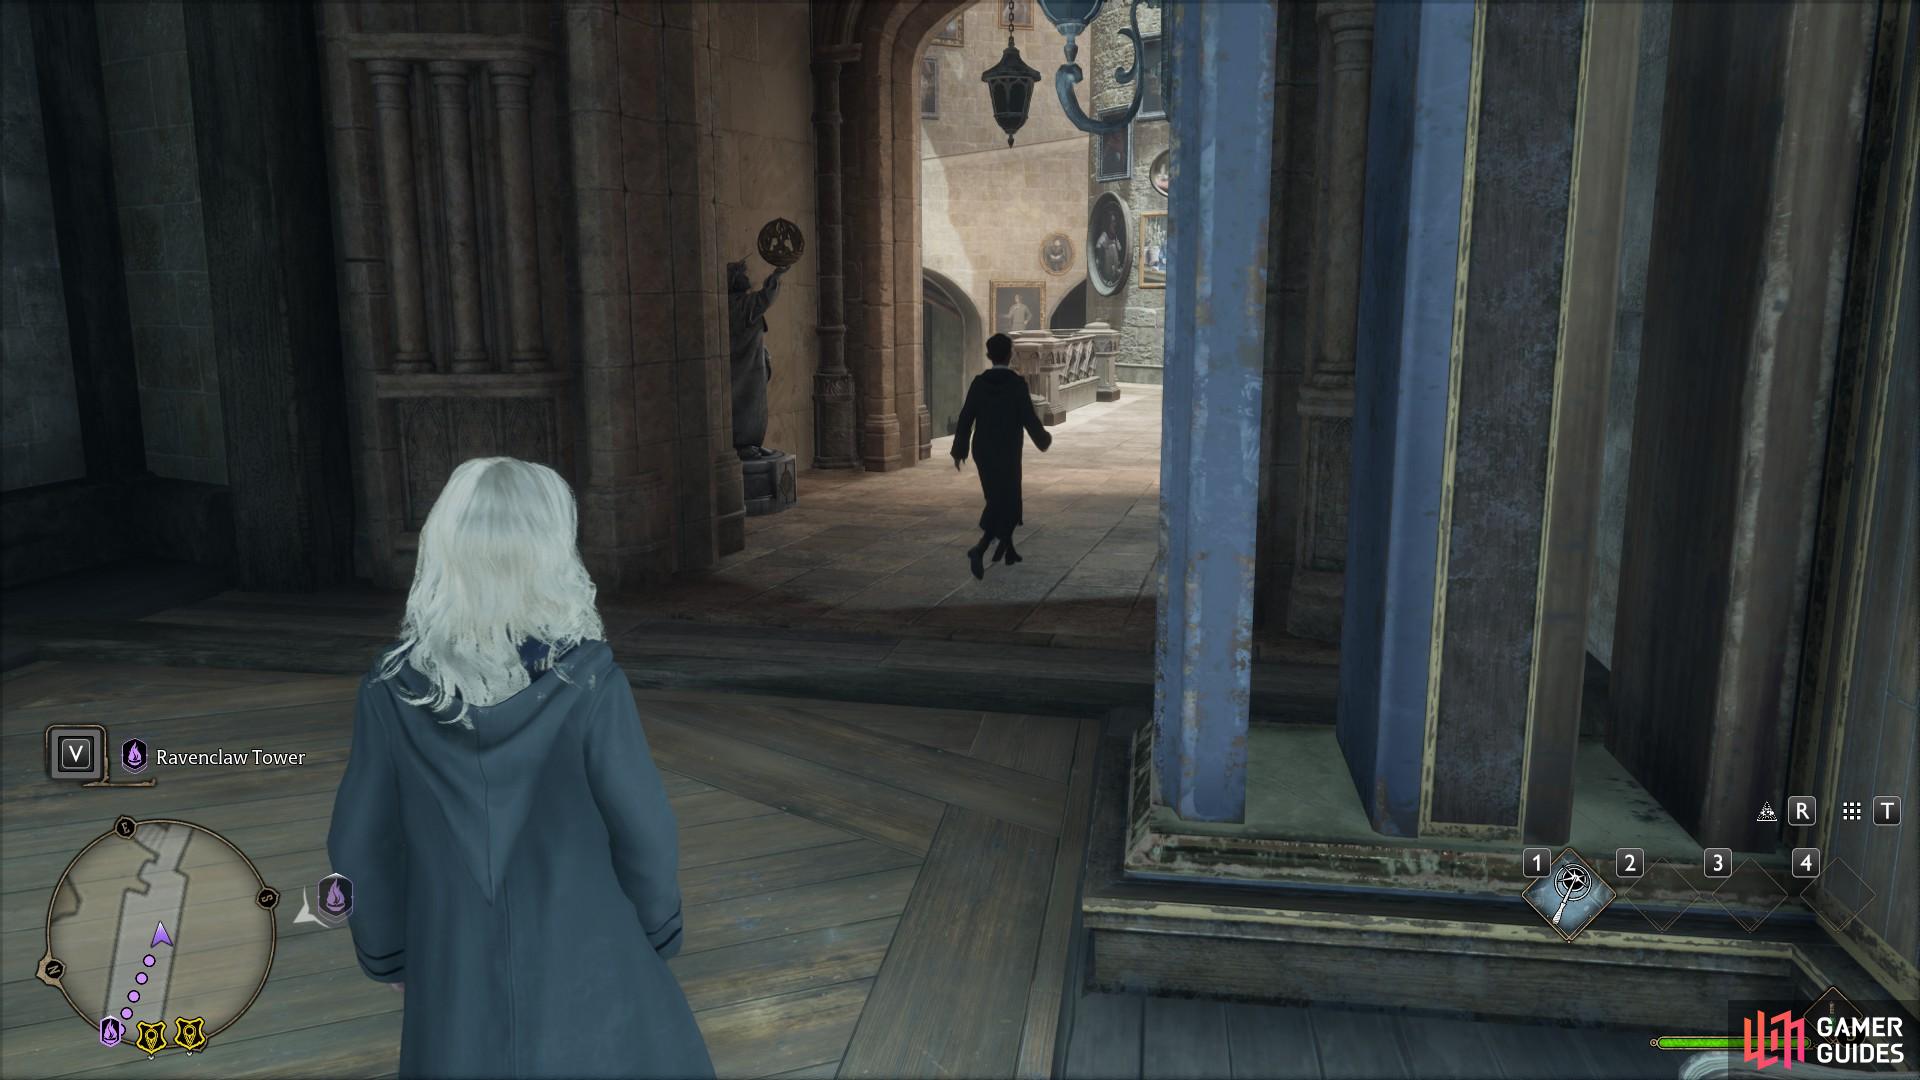 Where the Ravenclaw Tower hallway and the Grand Staircase meets is a !Levioso Statue.